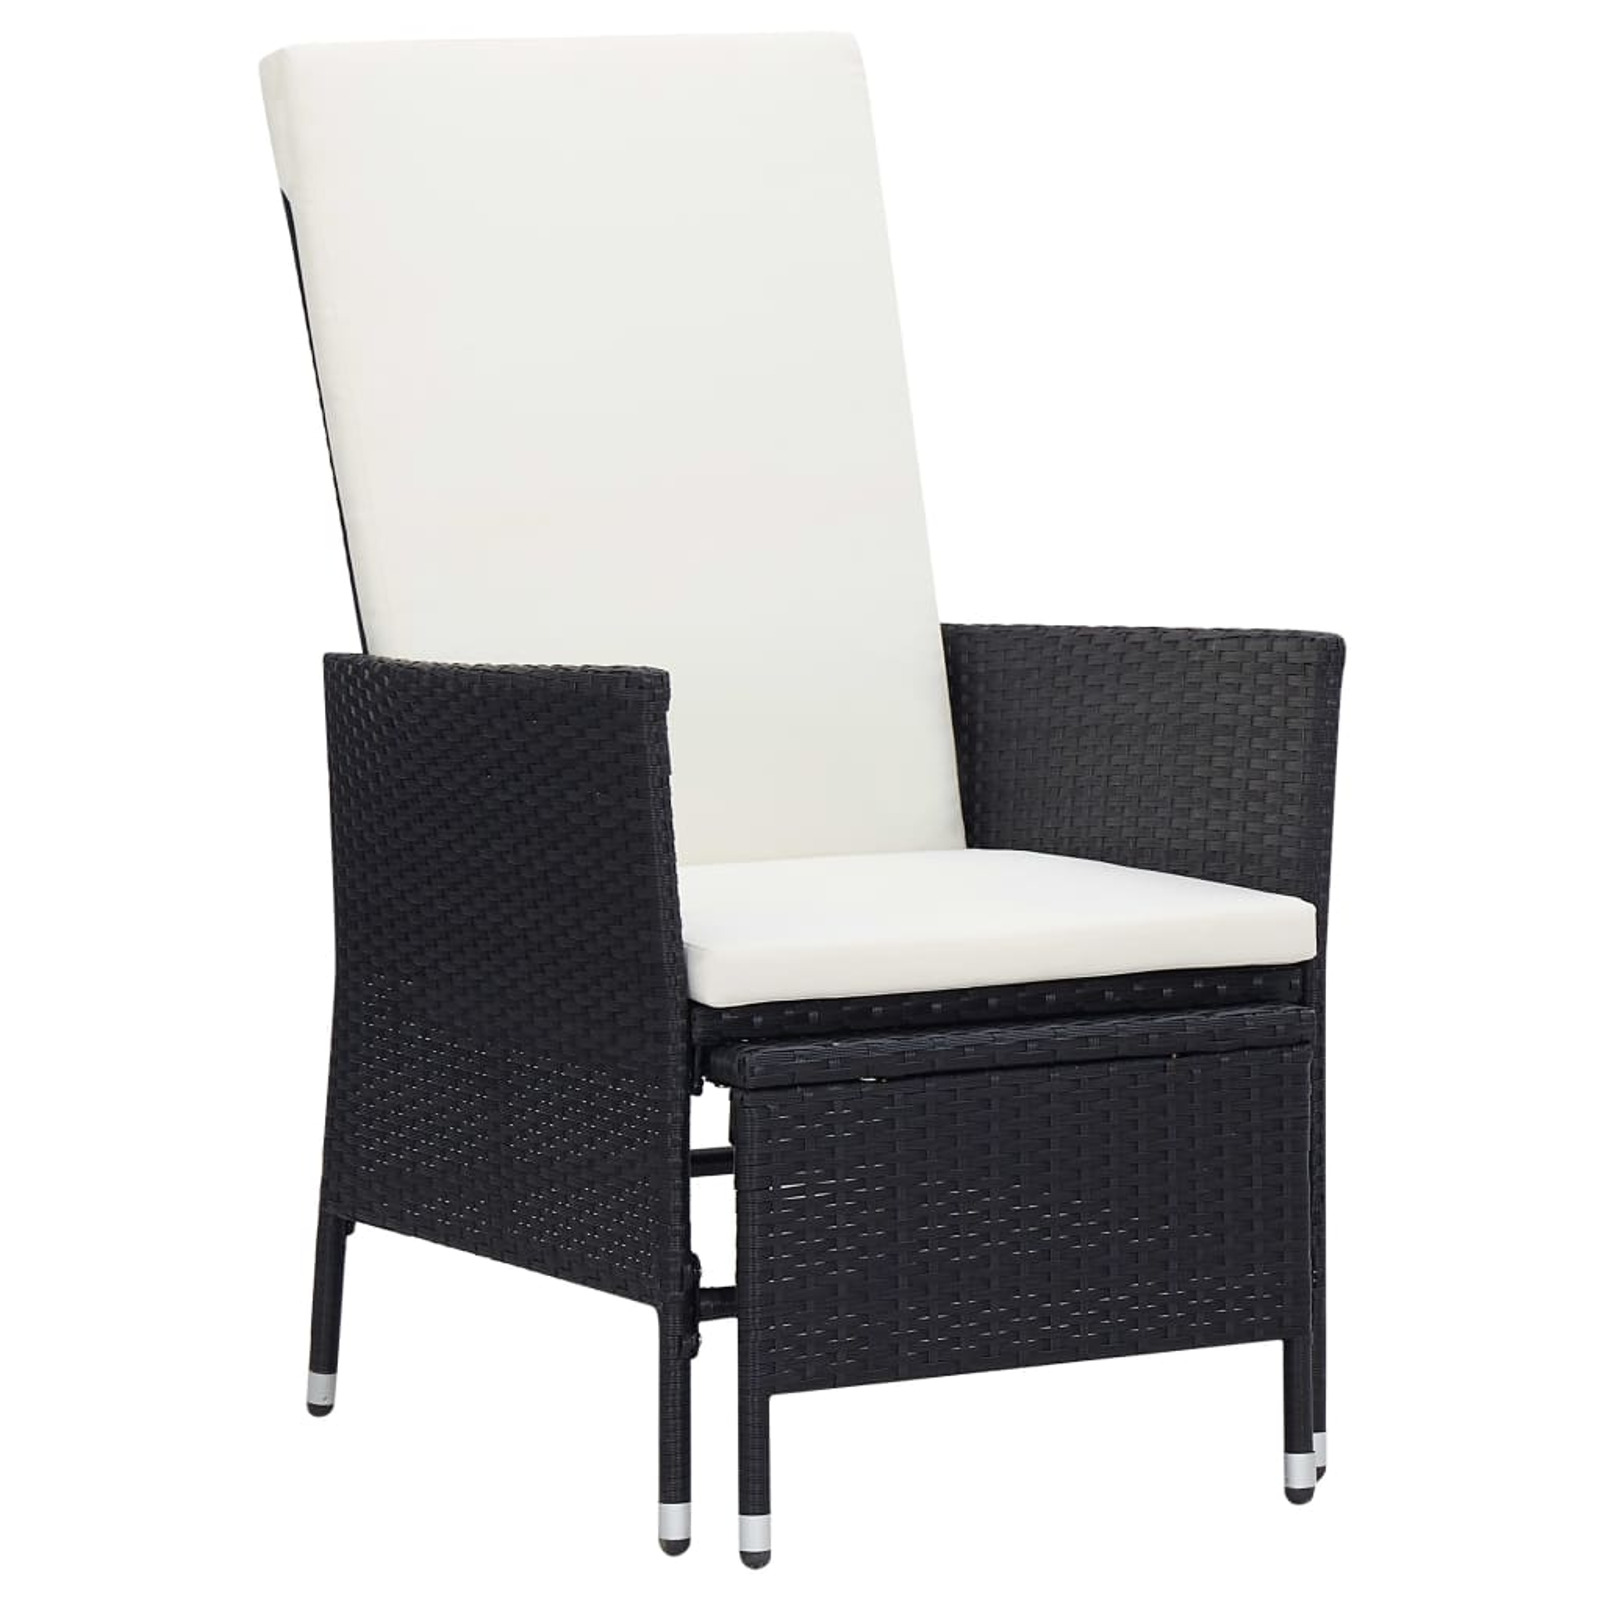 Reclining Patio Chair with Cushions Poly Rattan Black - image 1 of 7